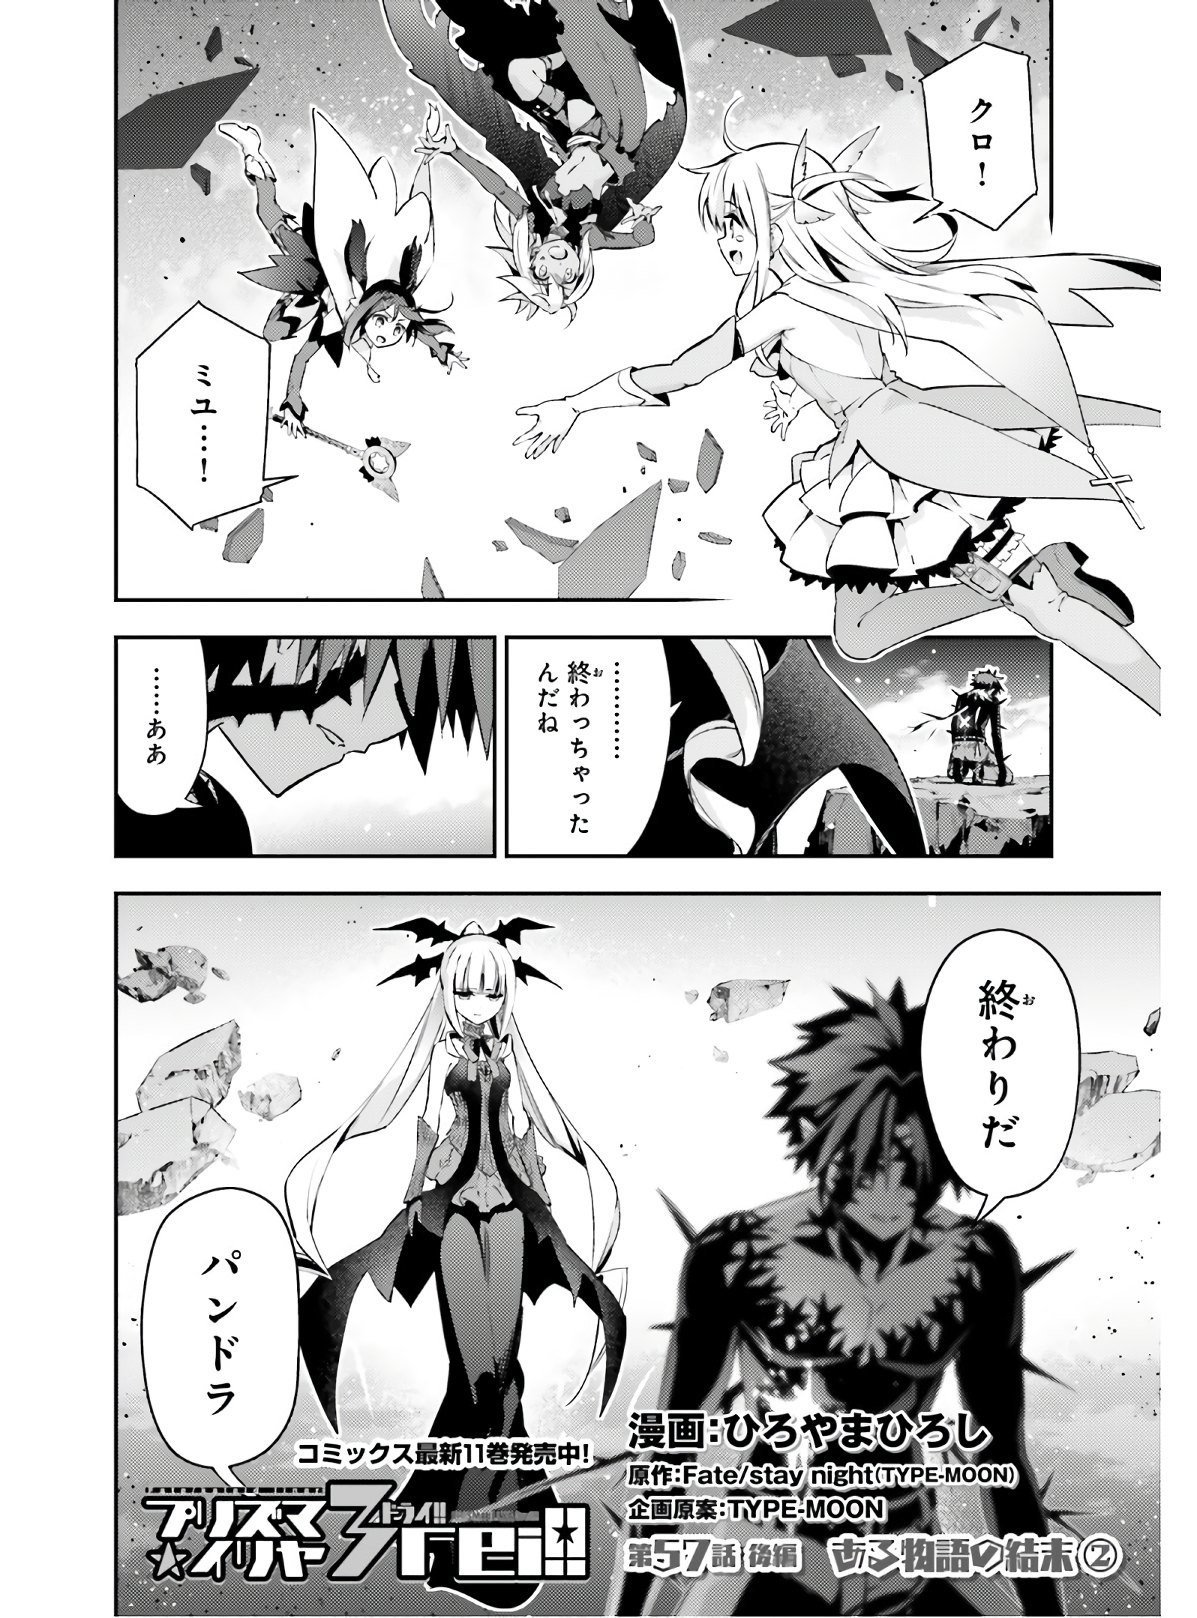 Fate/Kaleid Liner Prisma Illya Drei! - Chapter 57-2 - Page 2